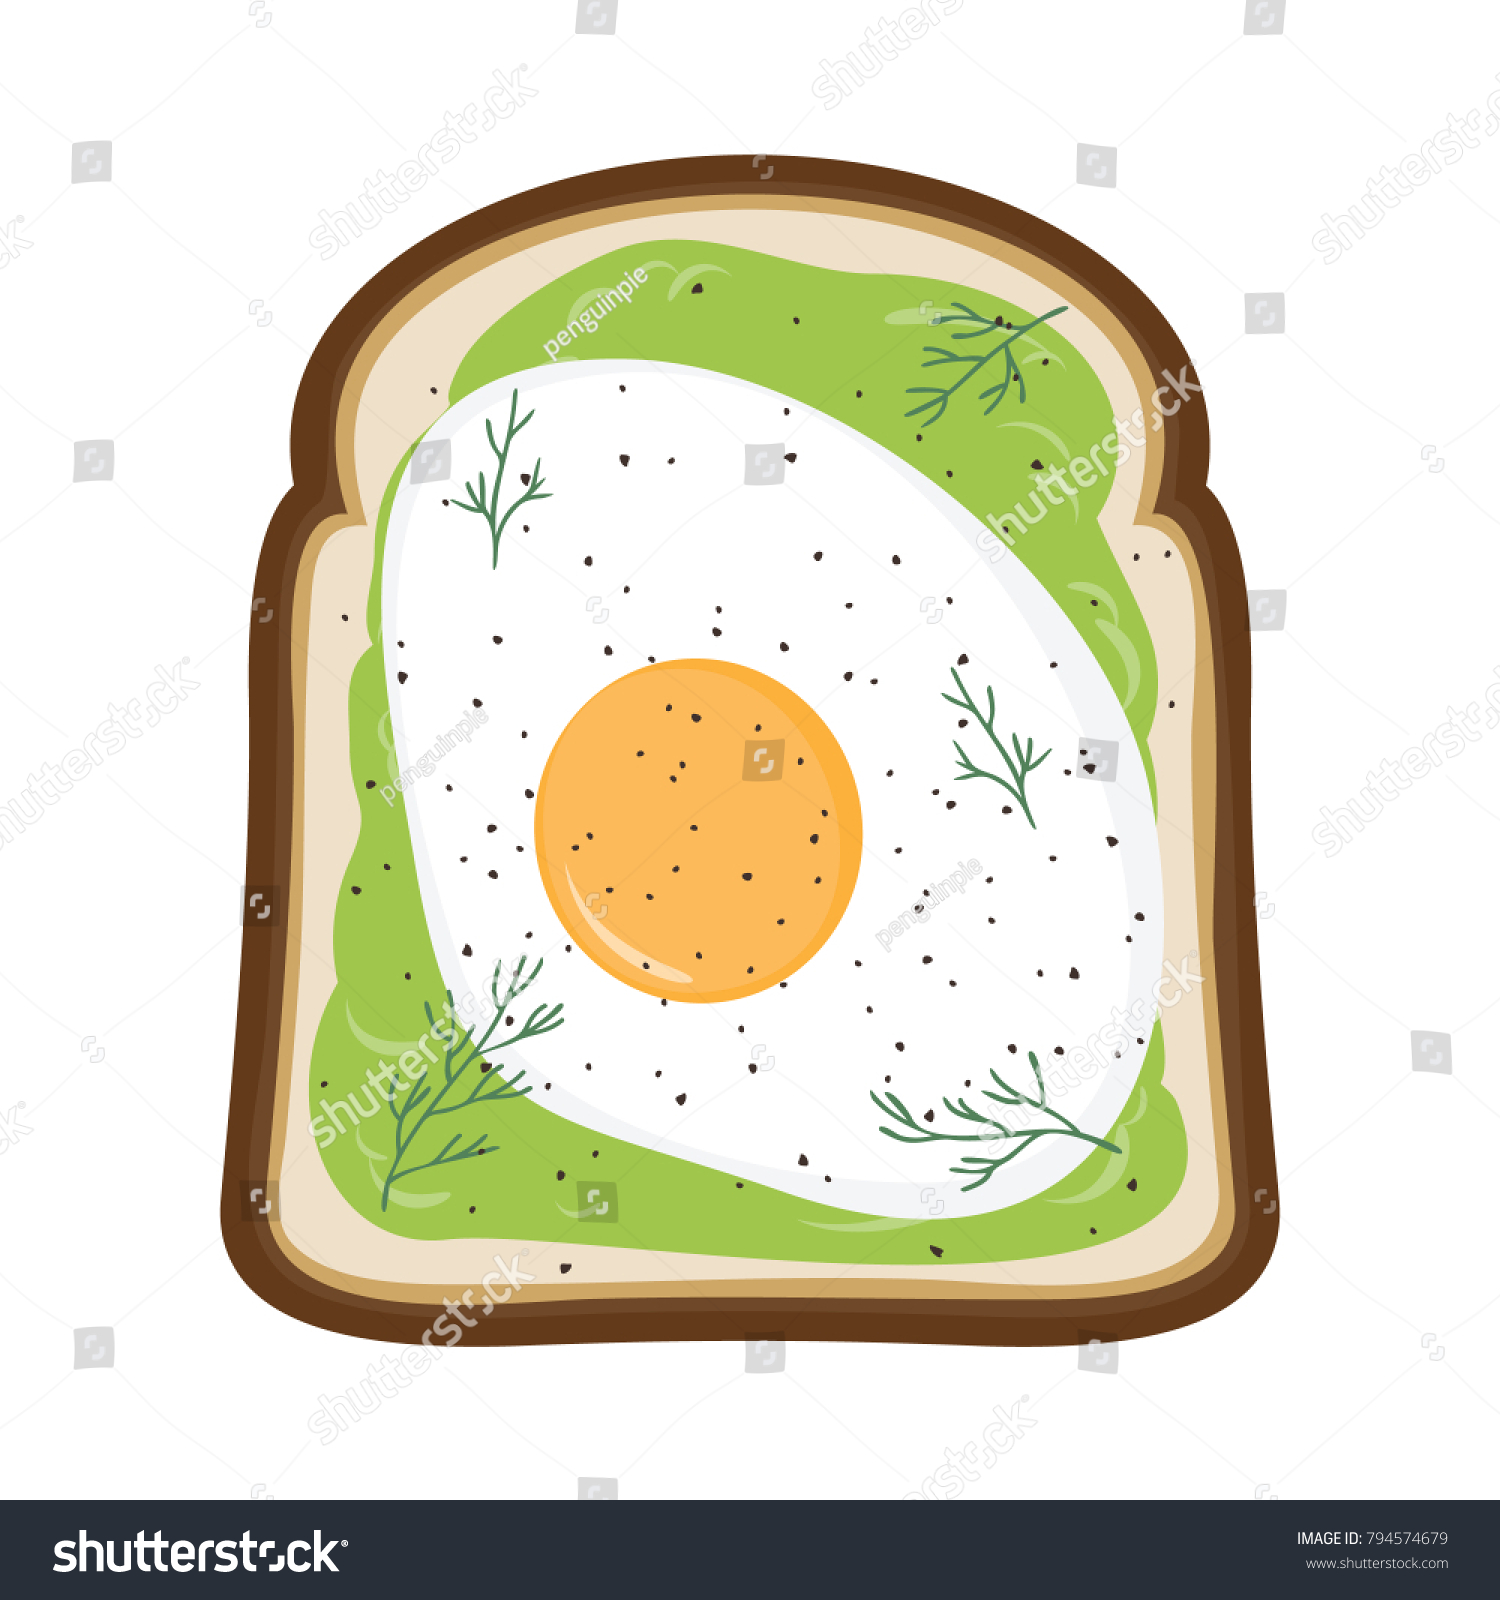 SVG of Avocado toast with fried egg, fresh dill and pepper illustration. Vector graphic of popular breakfast food of bread with mashed avocado and egg. svg